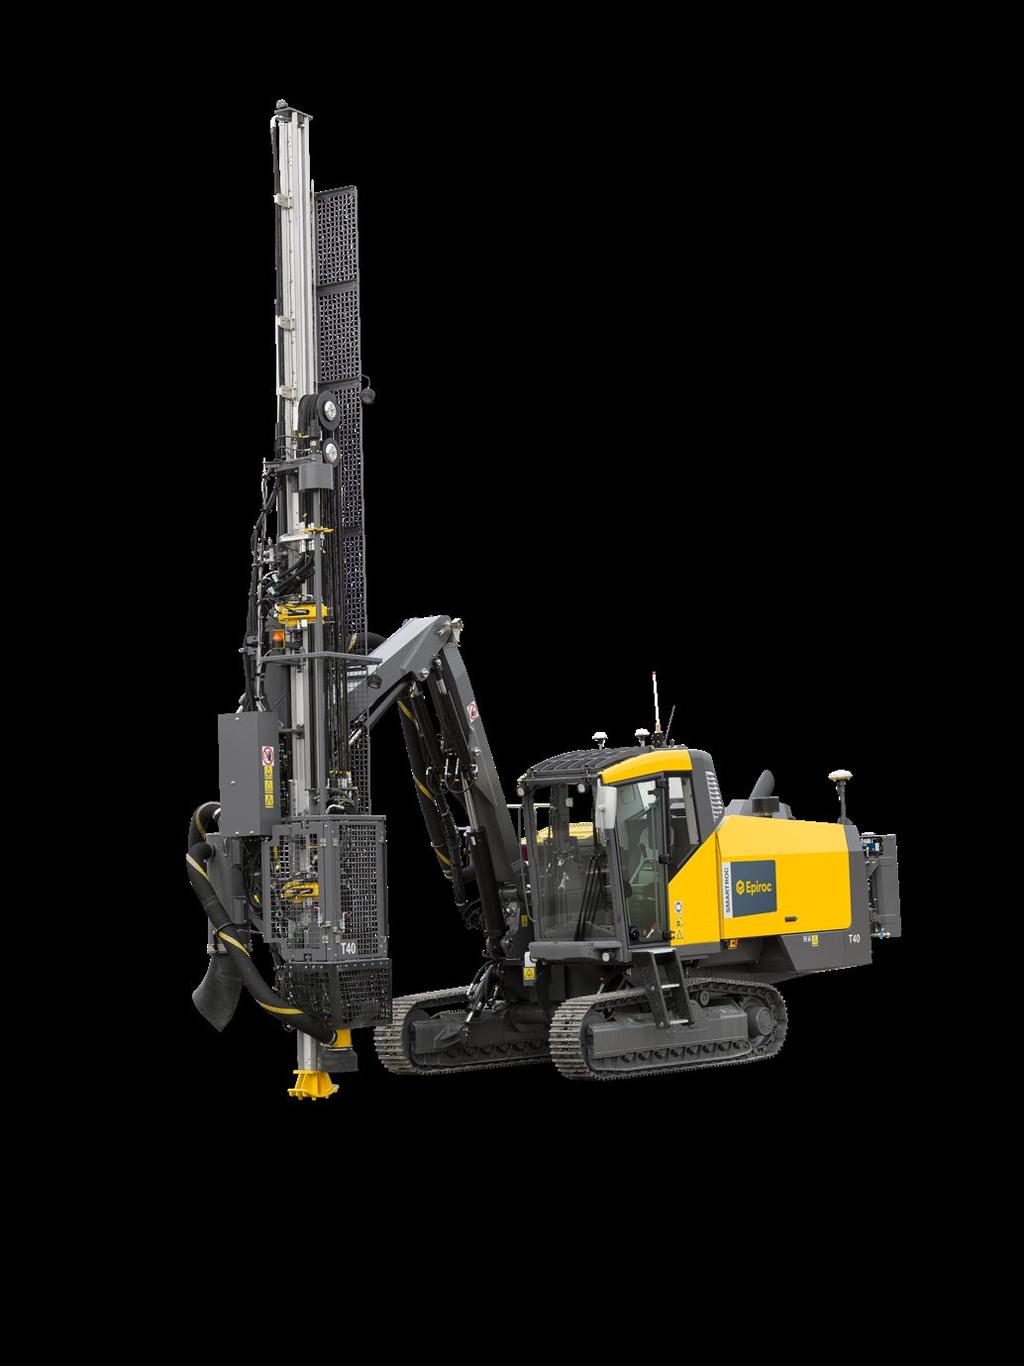 Not only are these rigs easier to operate and more productive, but they ensure the lowest cost per cubic meter produced by any comparable rig in their hole range.